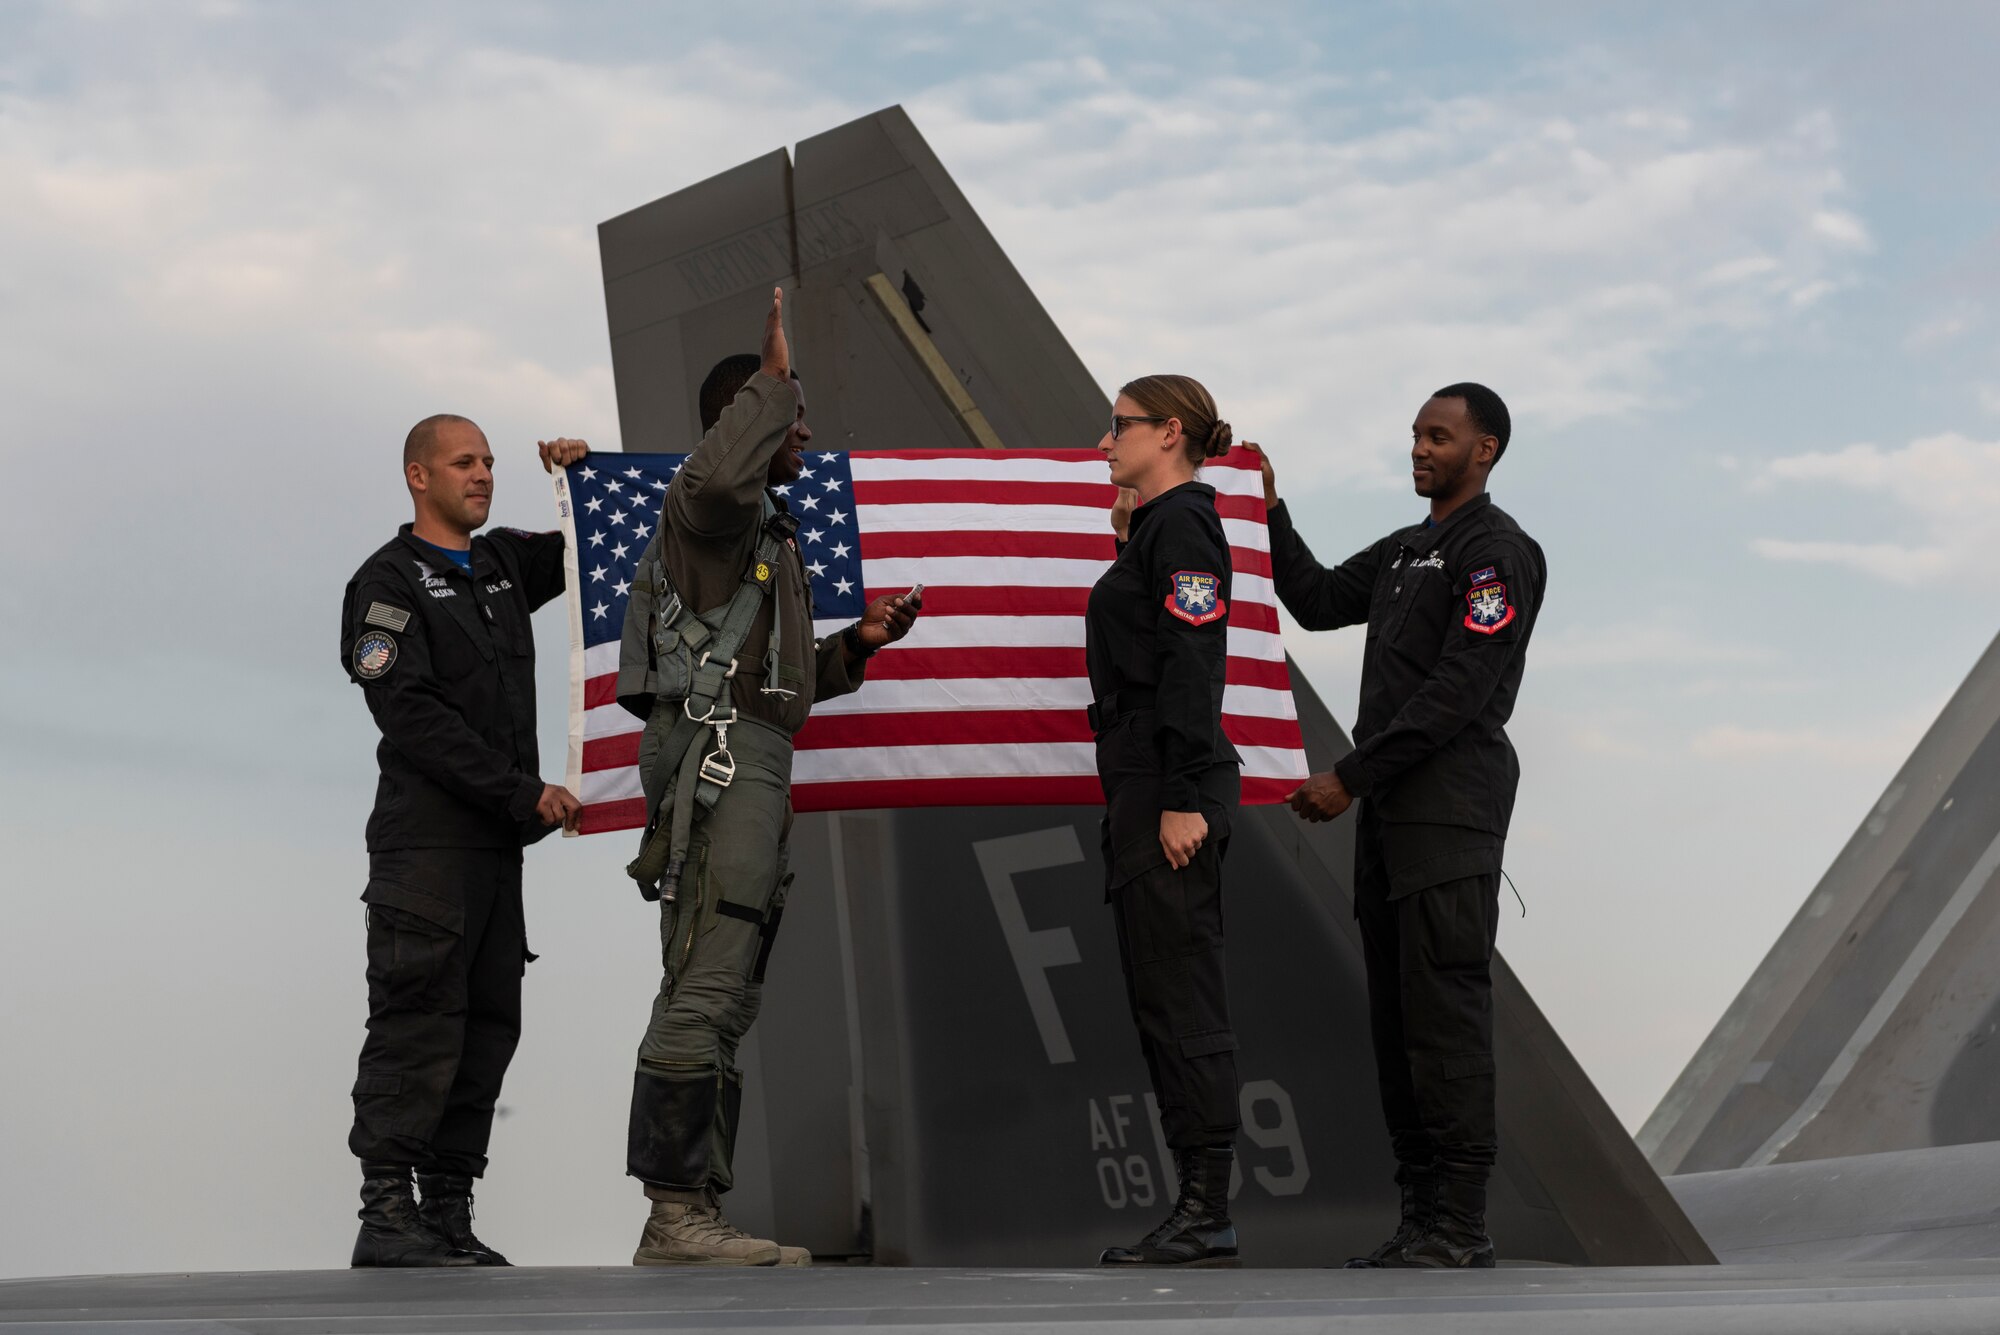 U.S. Air Force Lt. Col. Paul Lopez, second from left, the F-22 Demonstration Team commander, officiates a reenlistment ceremony for U.S. Air Force Staff Sgt. Annemarie Prozzillo, an F-22 Demonstration Team aircrew flight equipment technician, at the Dubai Airshow, United Arab Emirates, Nov. 18, 2019.